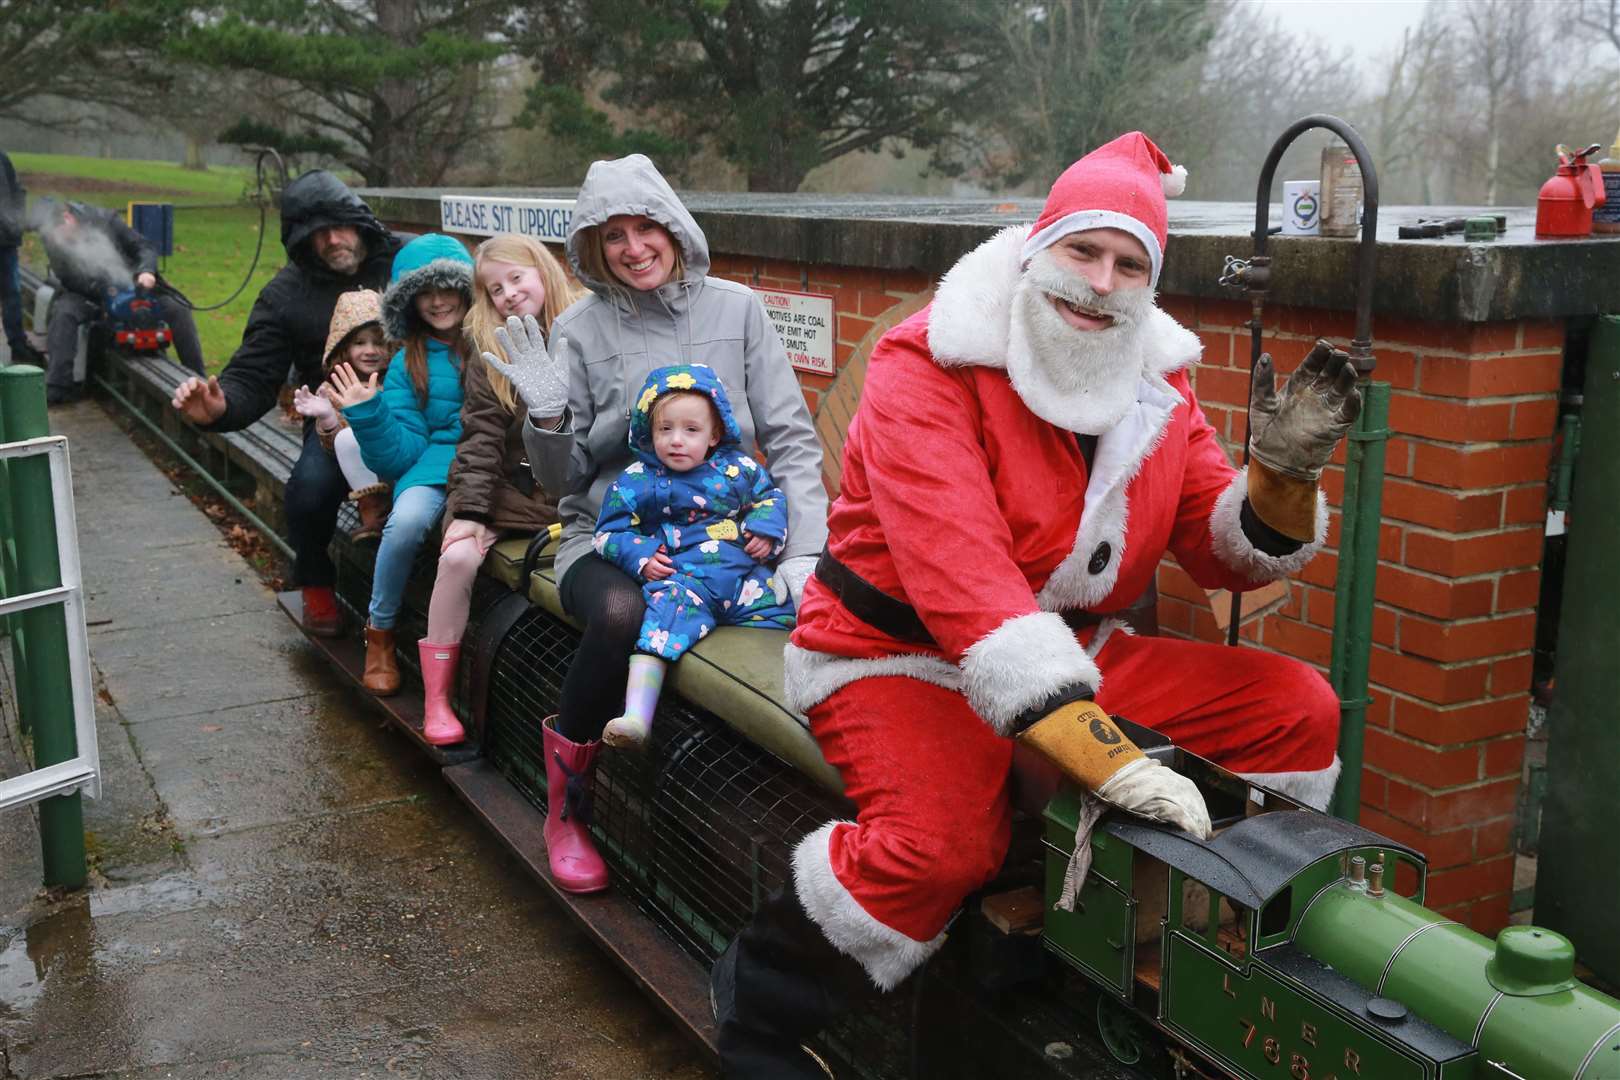 The Codwood family from Bearsted once hitched a lift with Santa. Picture: John Westhrop